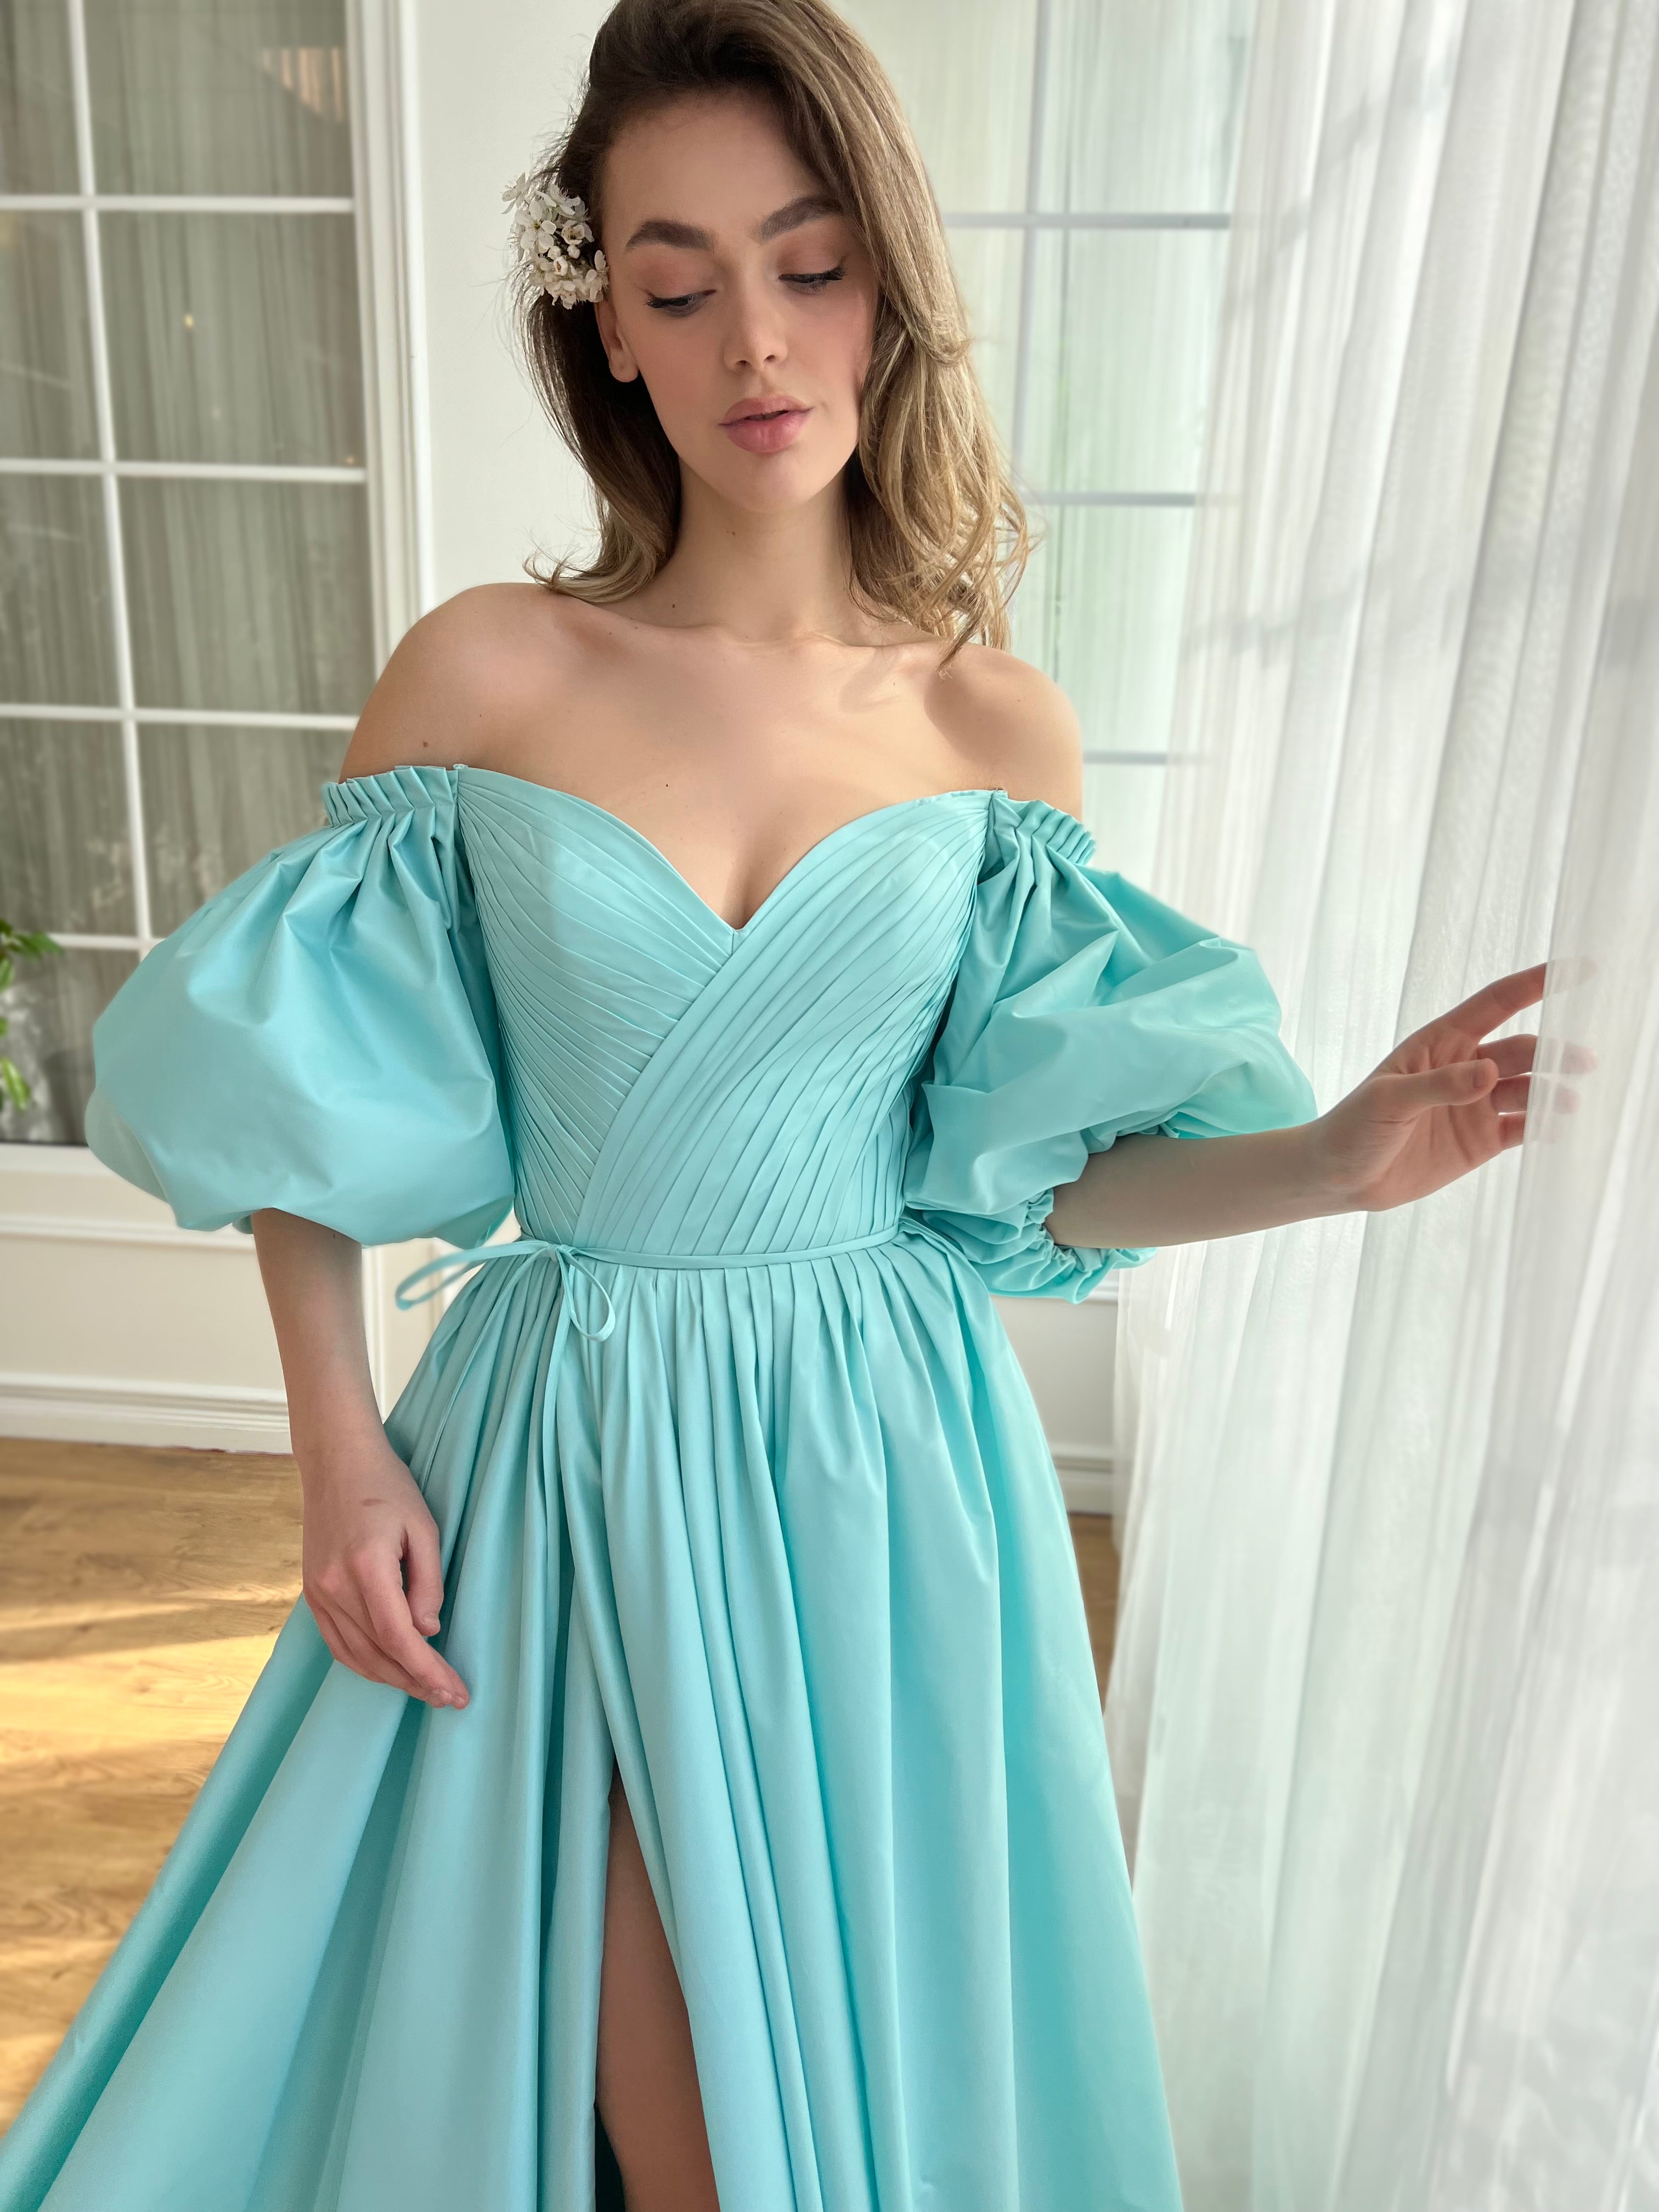 Blue A-Line dress with short off the shoulder sleeves